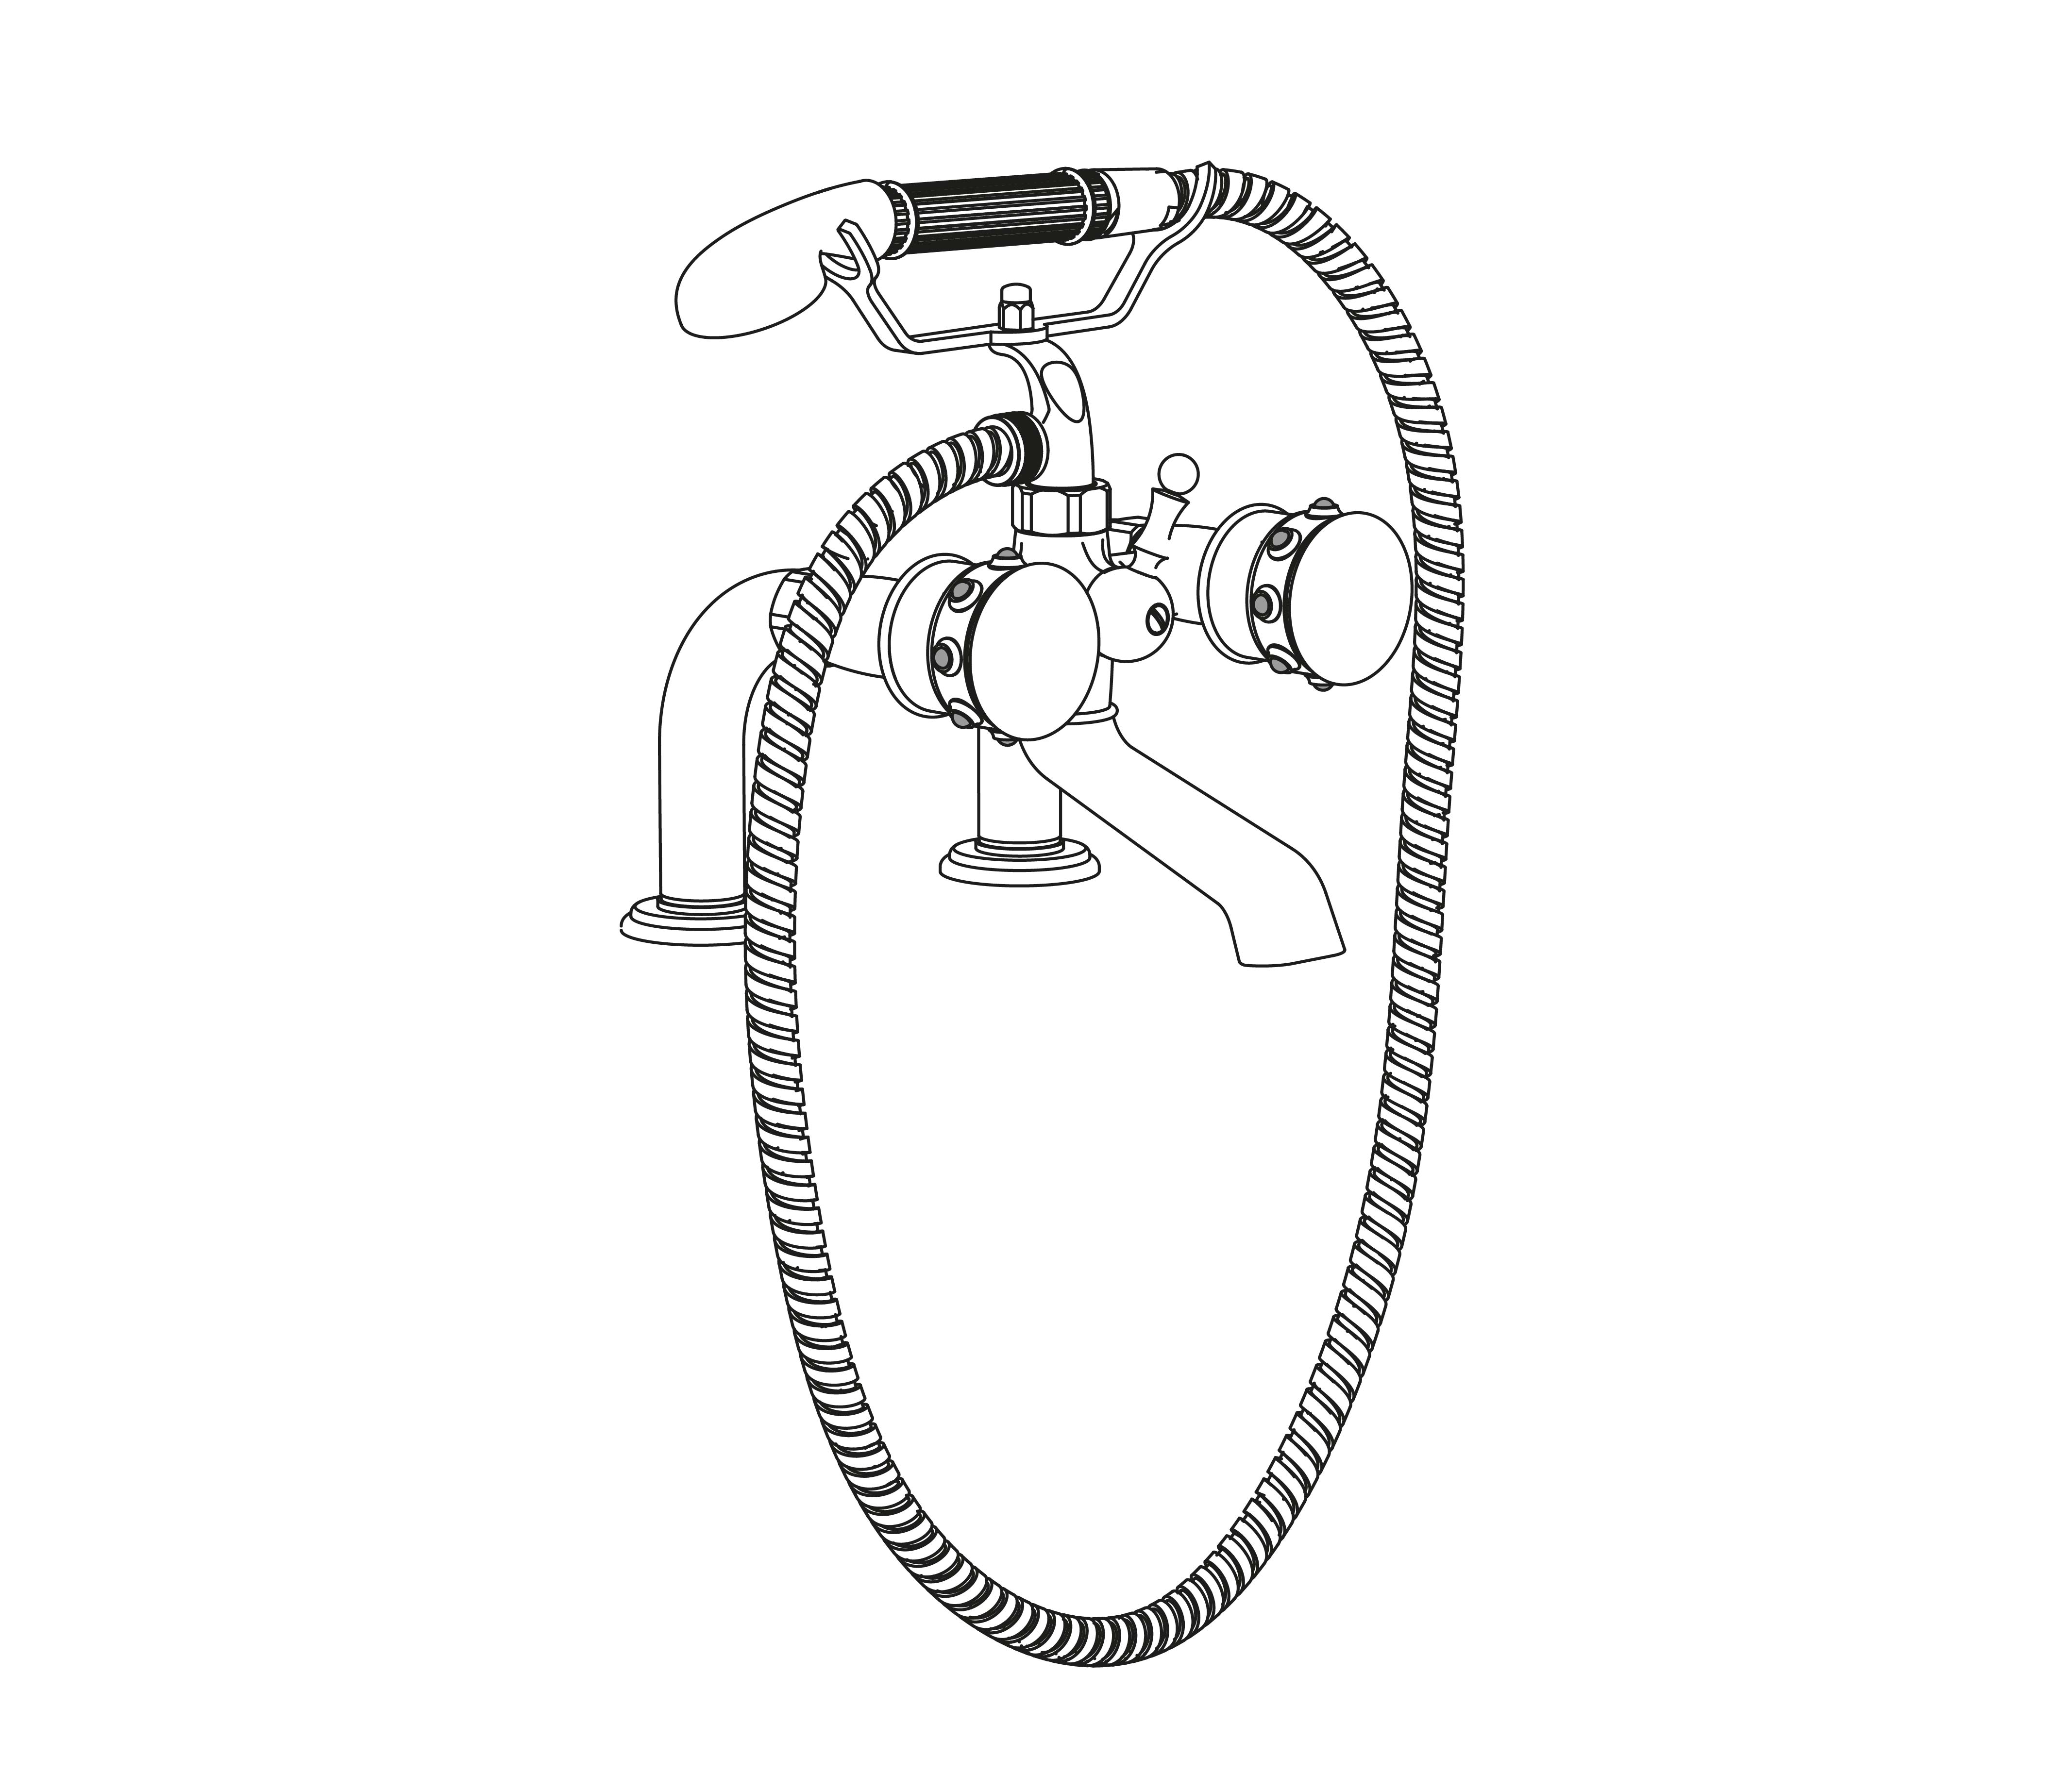 S169-3306 Rim mounted bath and shower mixer